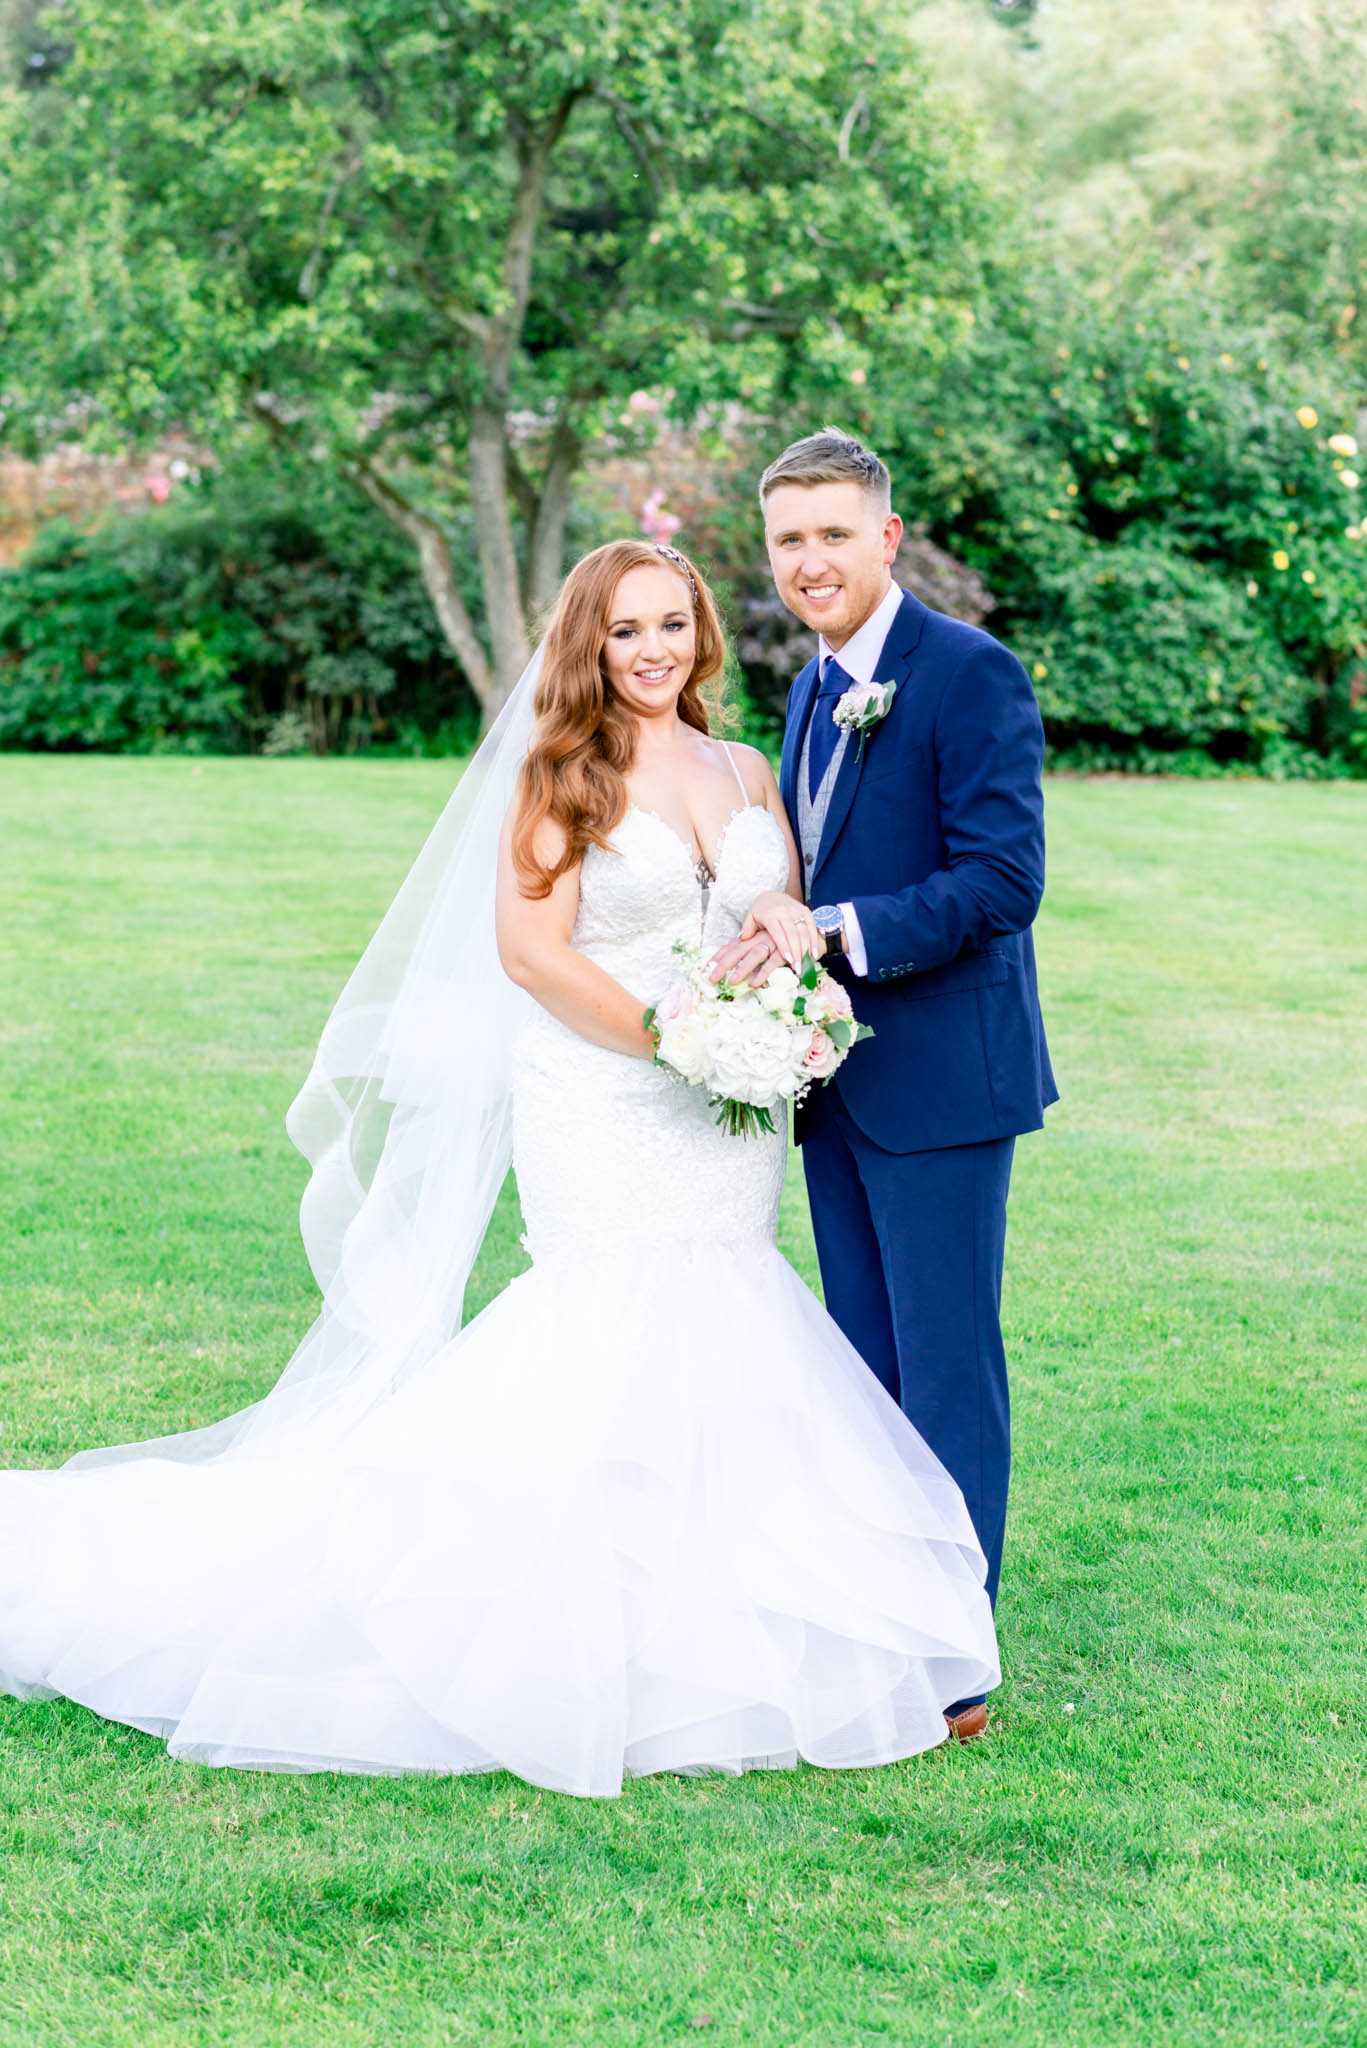 https://usercontent.one/wp/www.natalieandmax.co.uk/wp-content/uploads/2022/04/Gaynes-Park-Wedding-Photographer-by-Natalie-and-Max-Photo-and-Films-71.jpg?media=1711985334